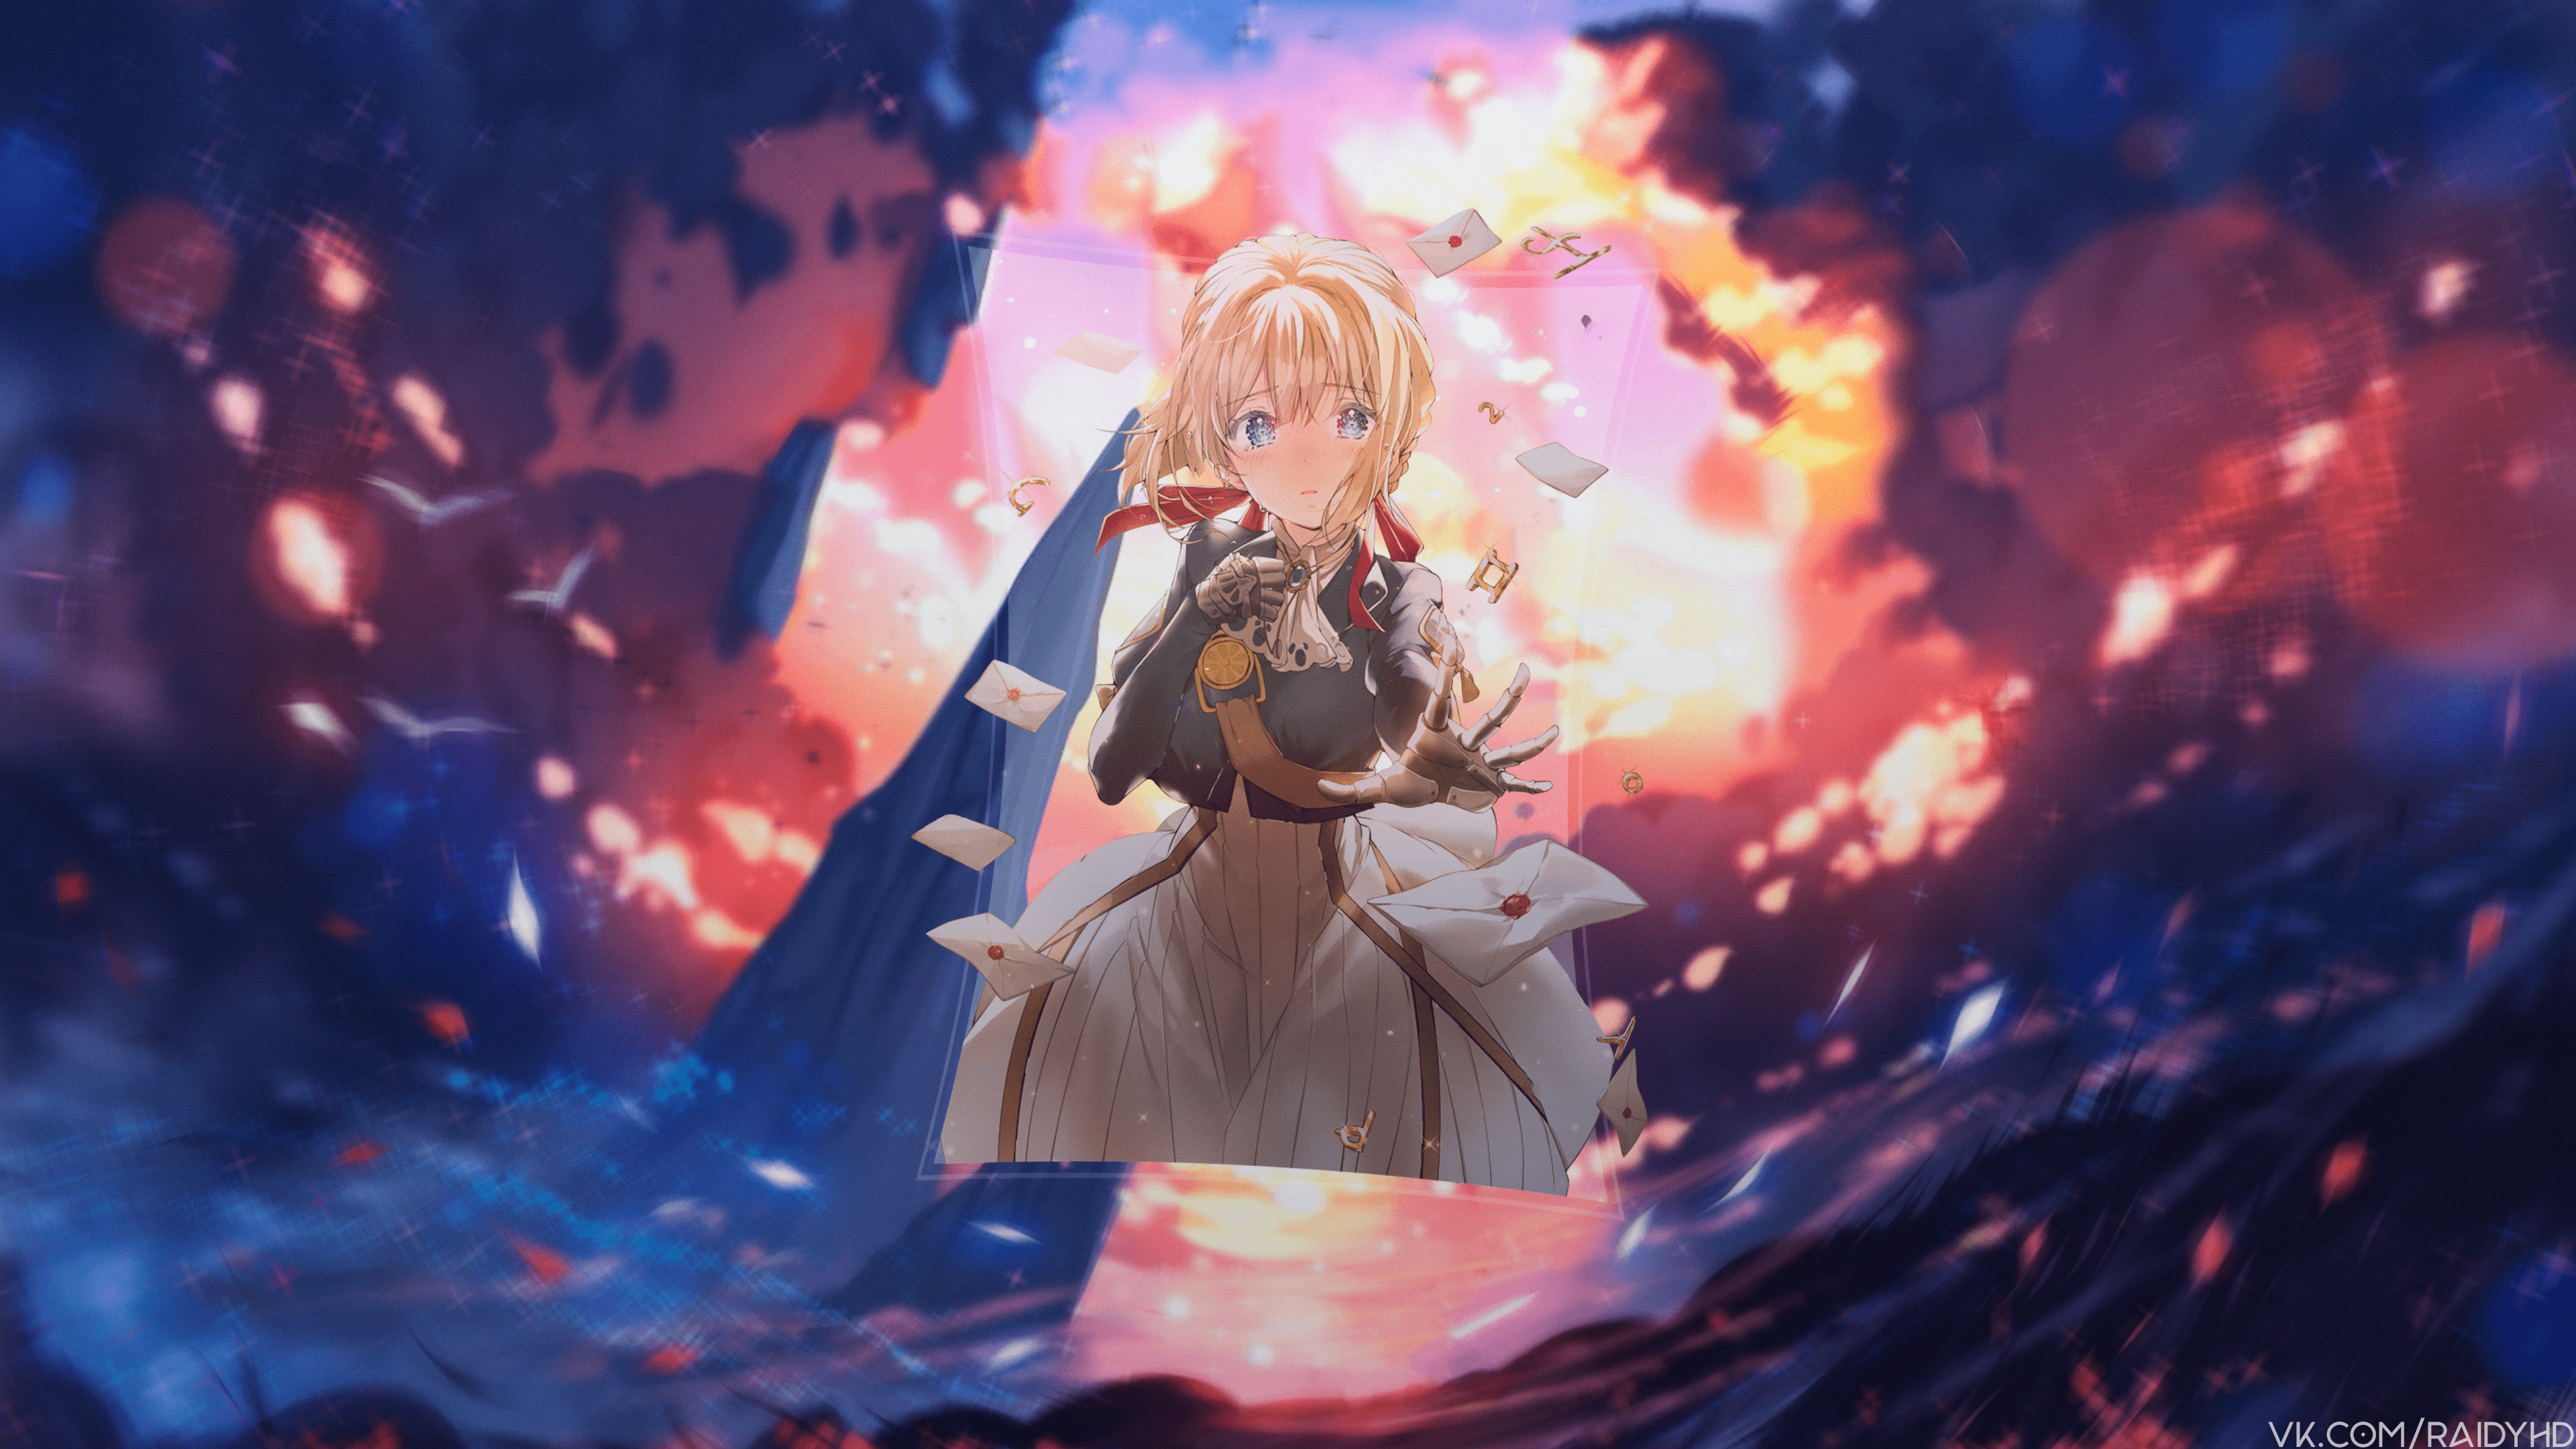 Anime 3840x2160 Violet Evergarden anime girls anime picture-in-picture